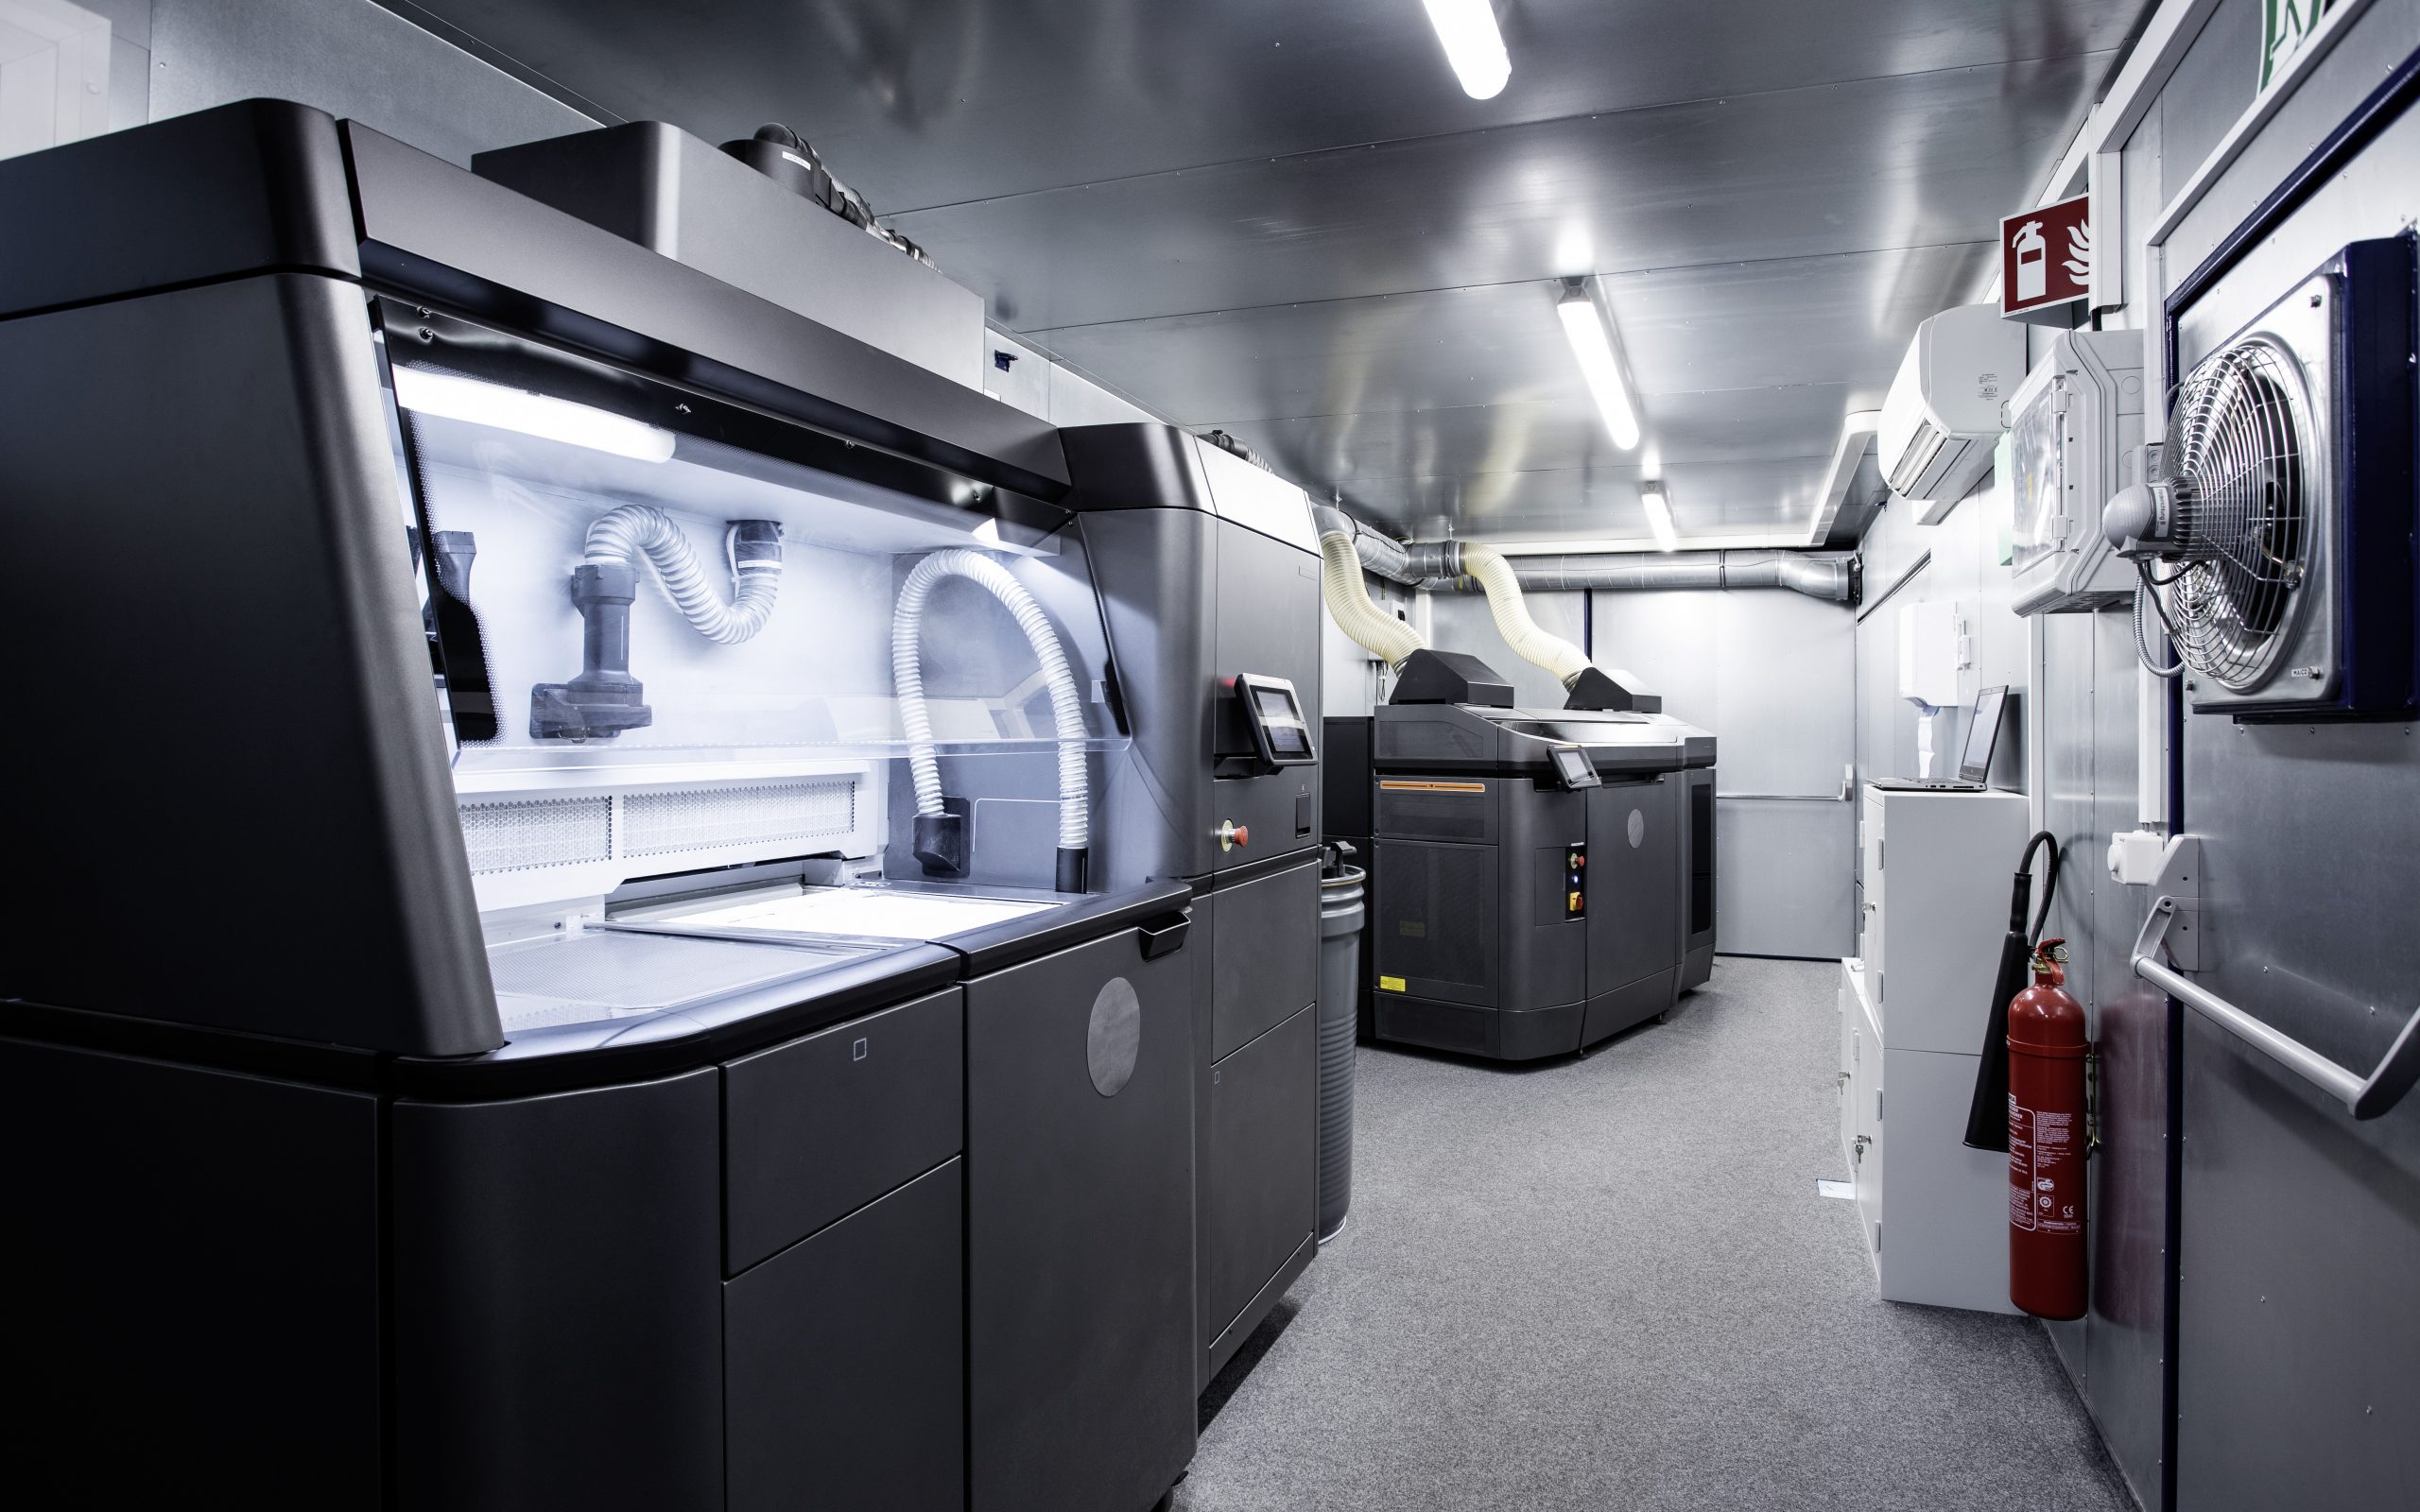 The mobile printing center includes all of the stations relevant to the production of spare parts using a 3D printer on an area of 36 meters squared. Photo via Daimler.